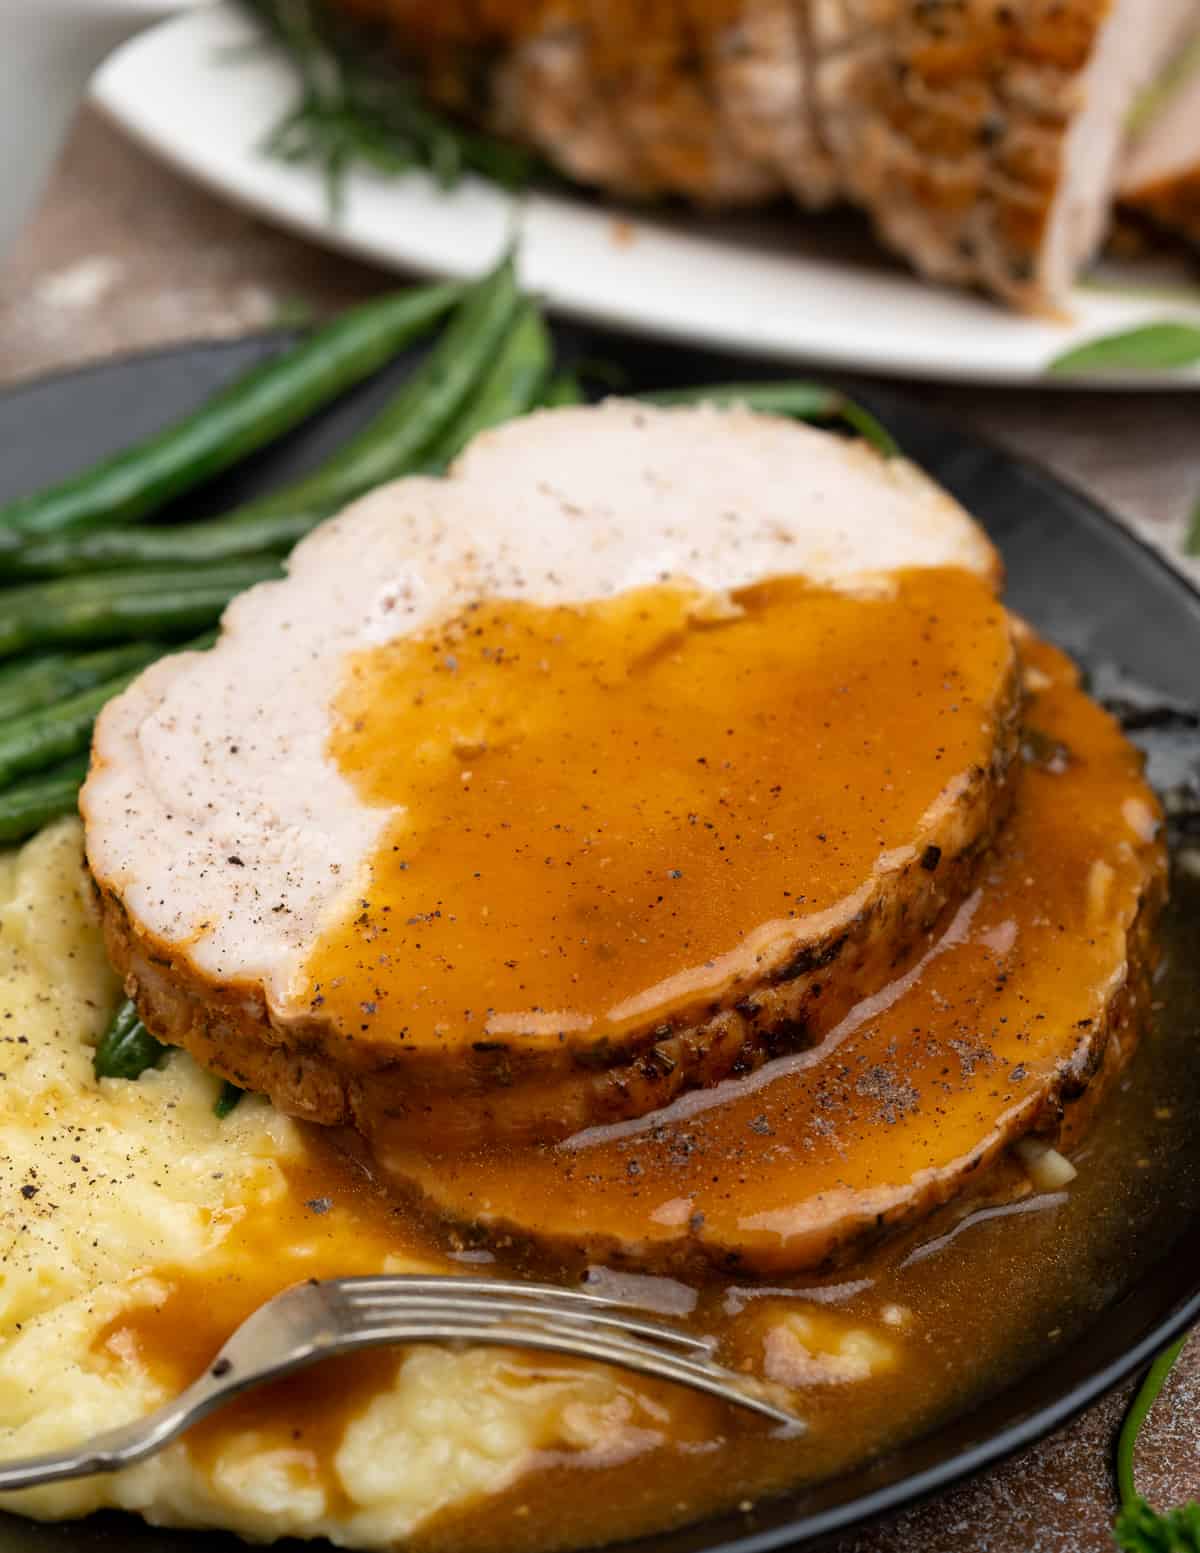 Two slices of roasted turkey breast served with a flavorful, velvety gravy along with mashed potatoes and green beans on a black plate.